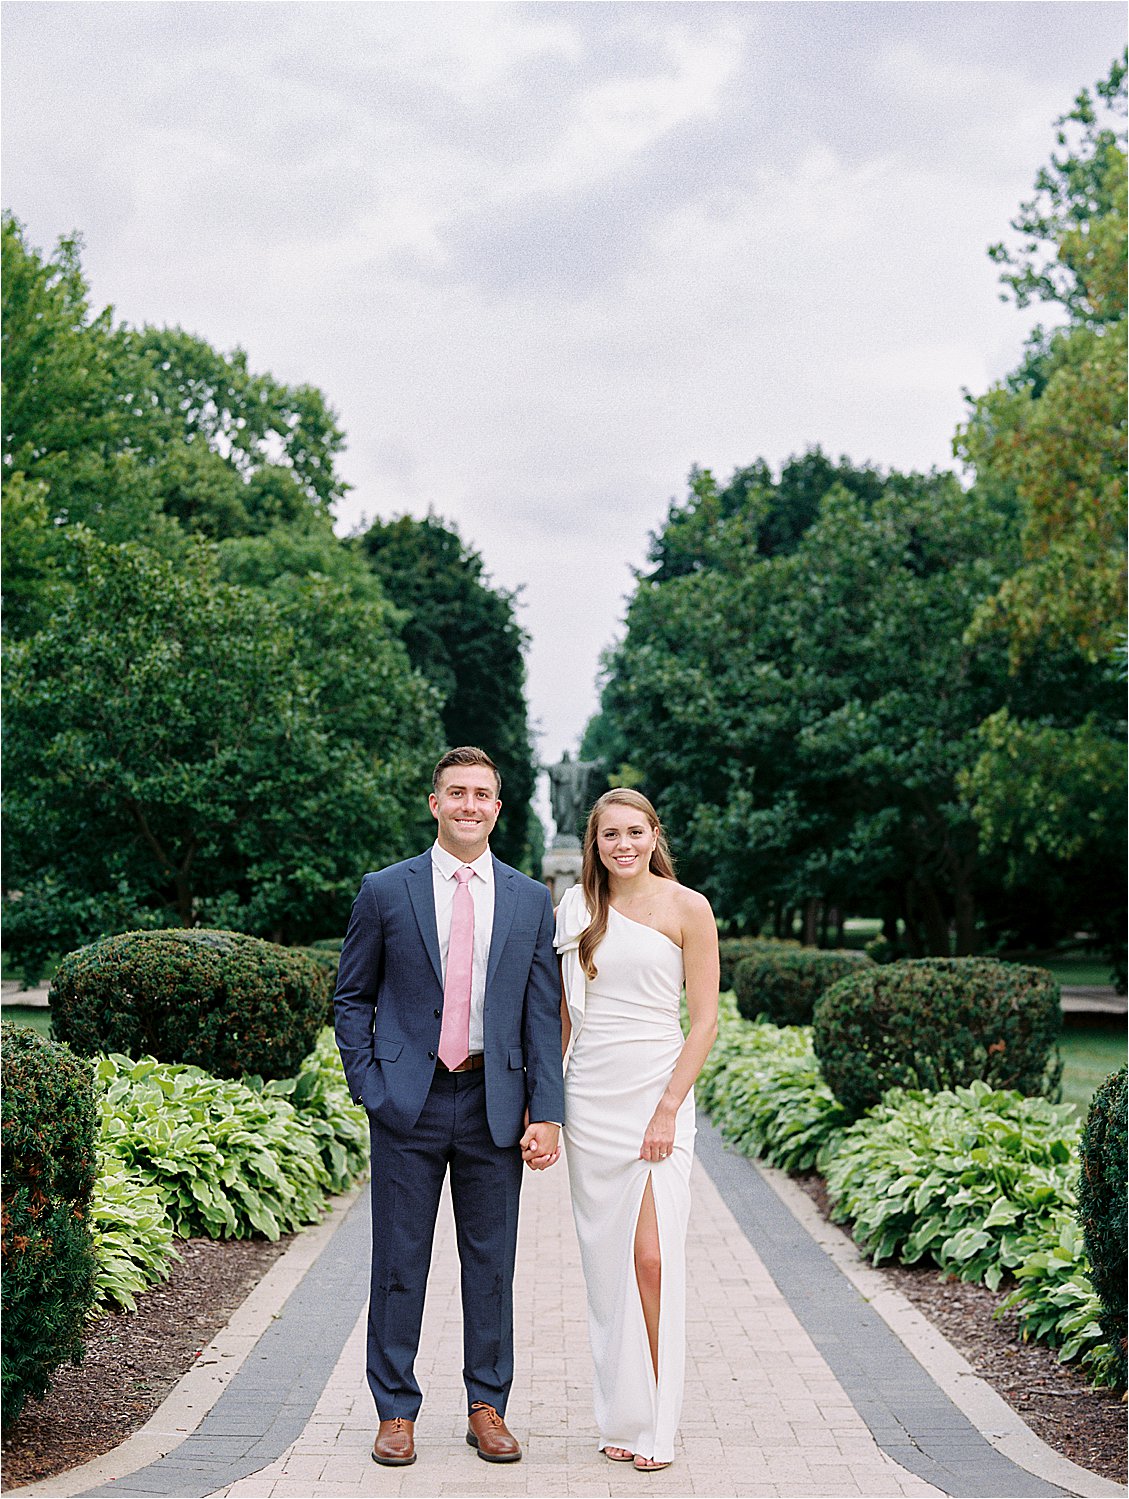 Golden Hour Engagement Session at University of Notre Dame with Chicago Film Wedding Photographer Renee Hollingshead